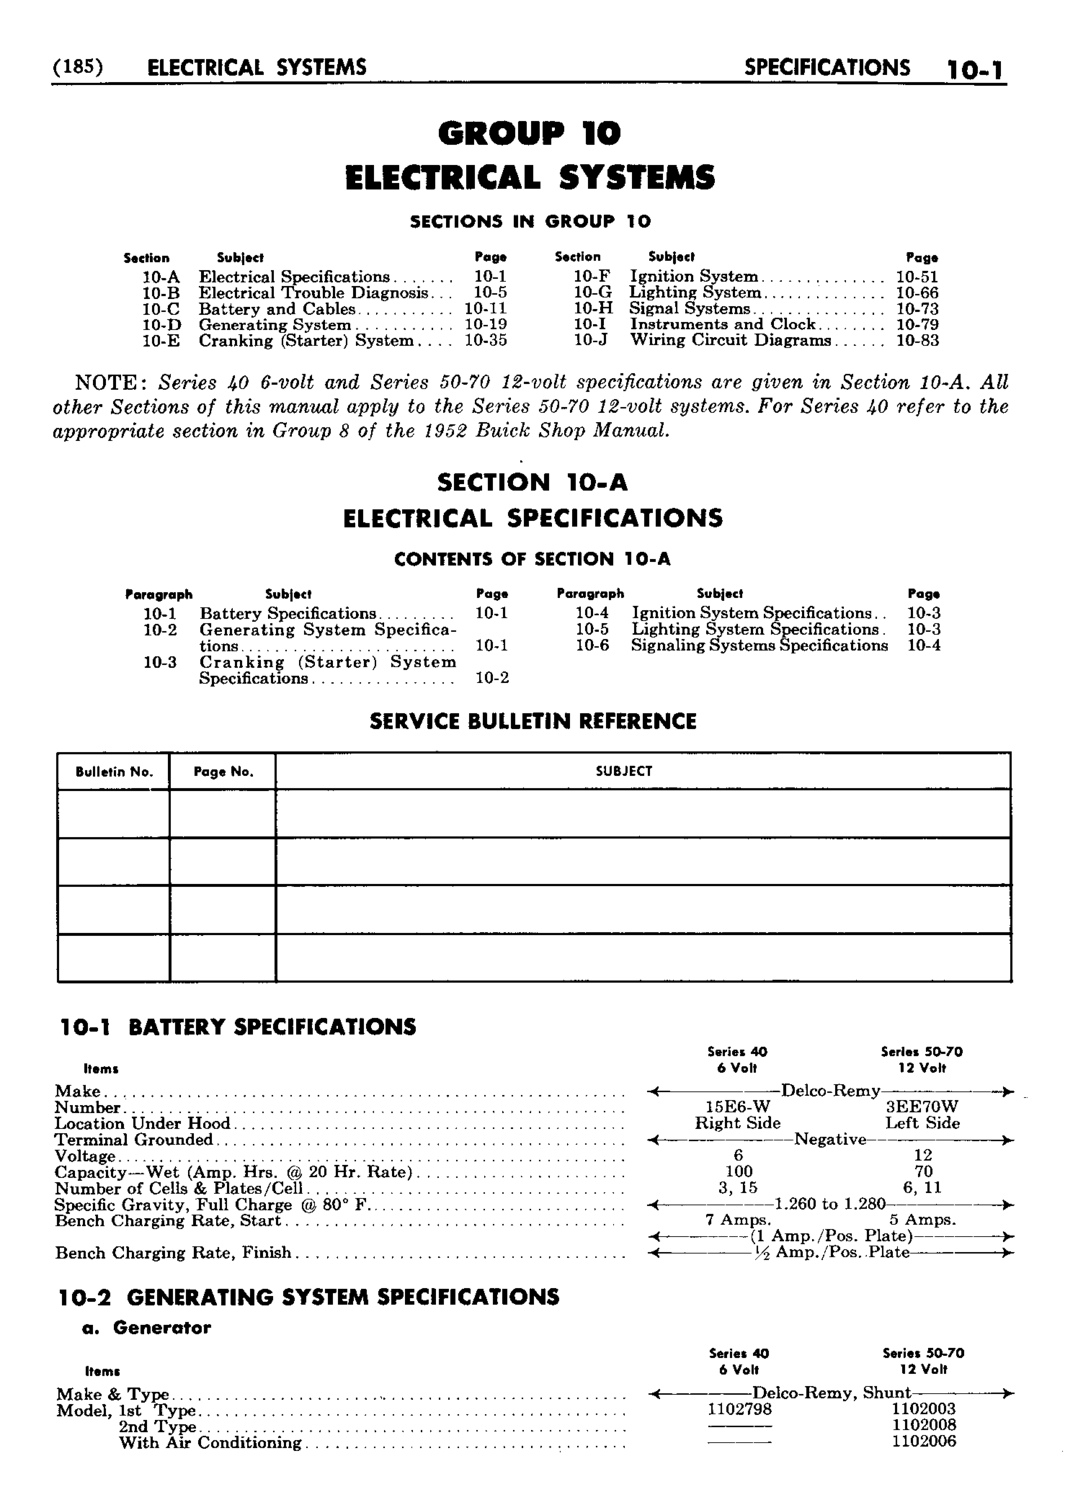 n_11 1953 Buick Shop Manual - Electrical Systems-001-001.jpg